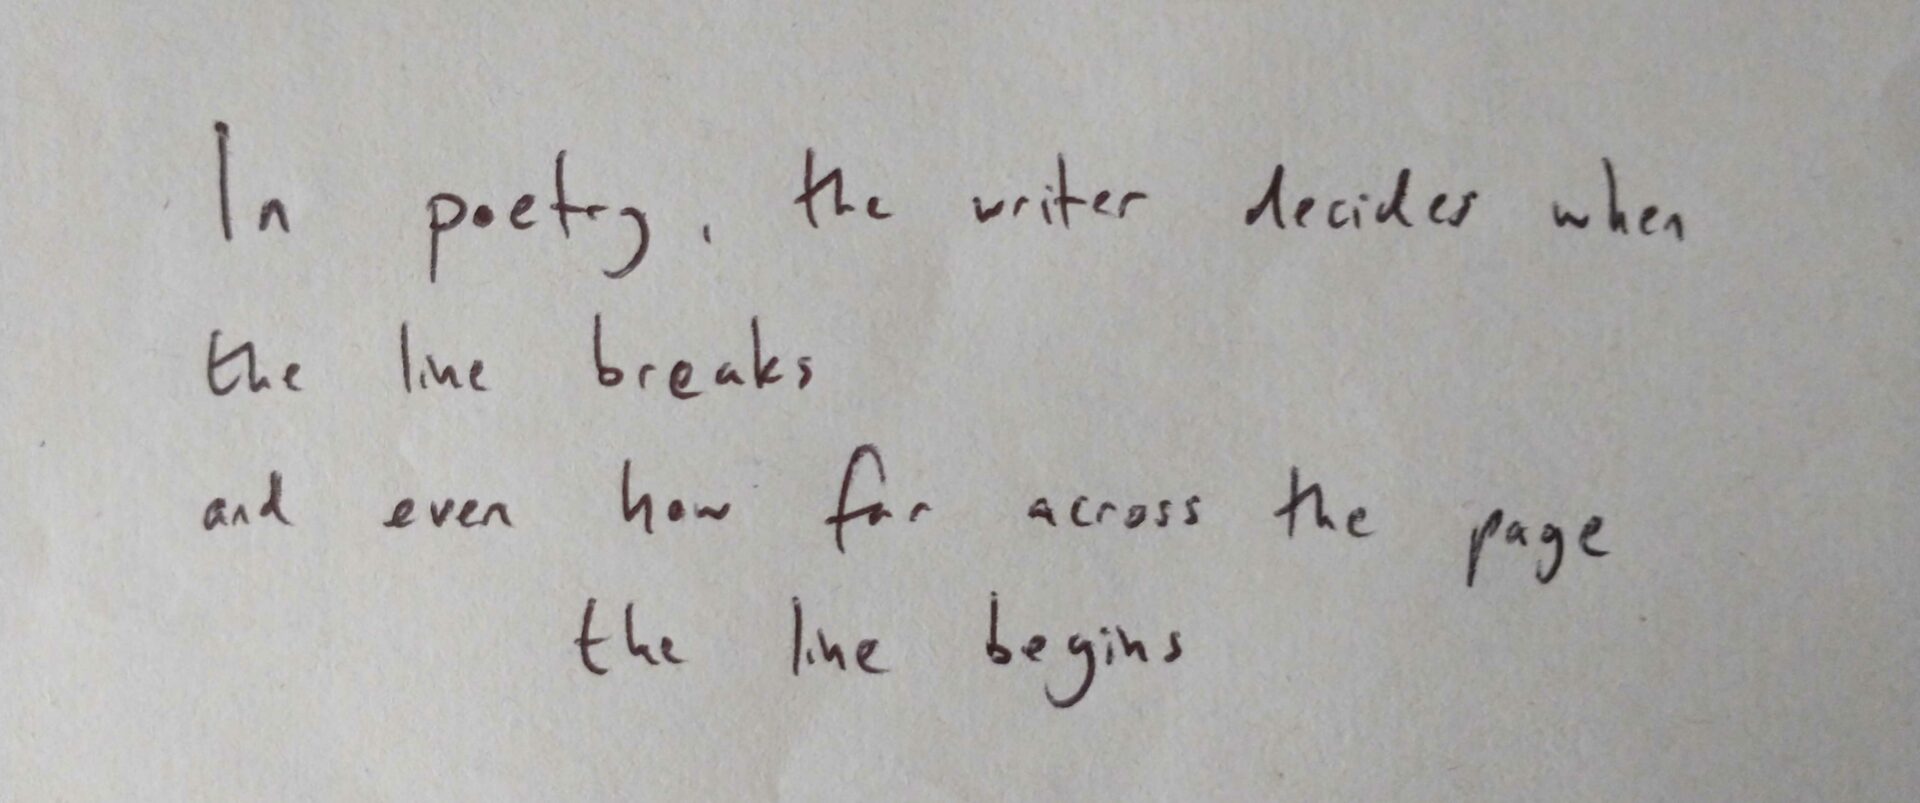 In poetry, the writer decides when the line breaks, and even how far across the page the line begins.